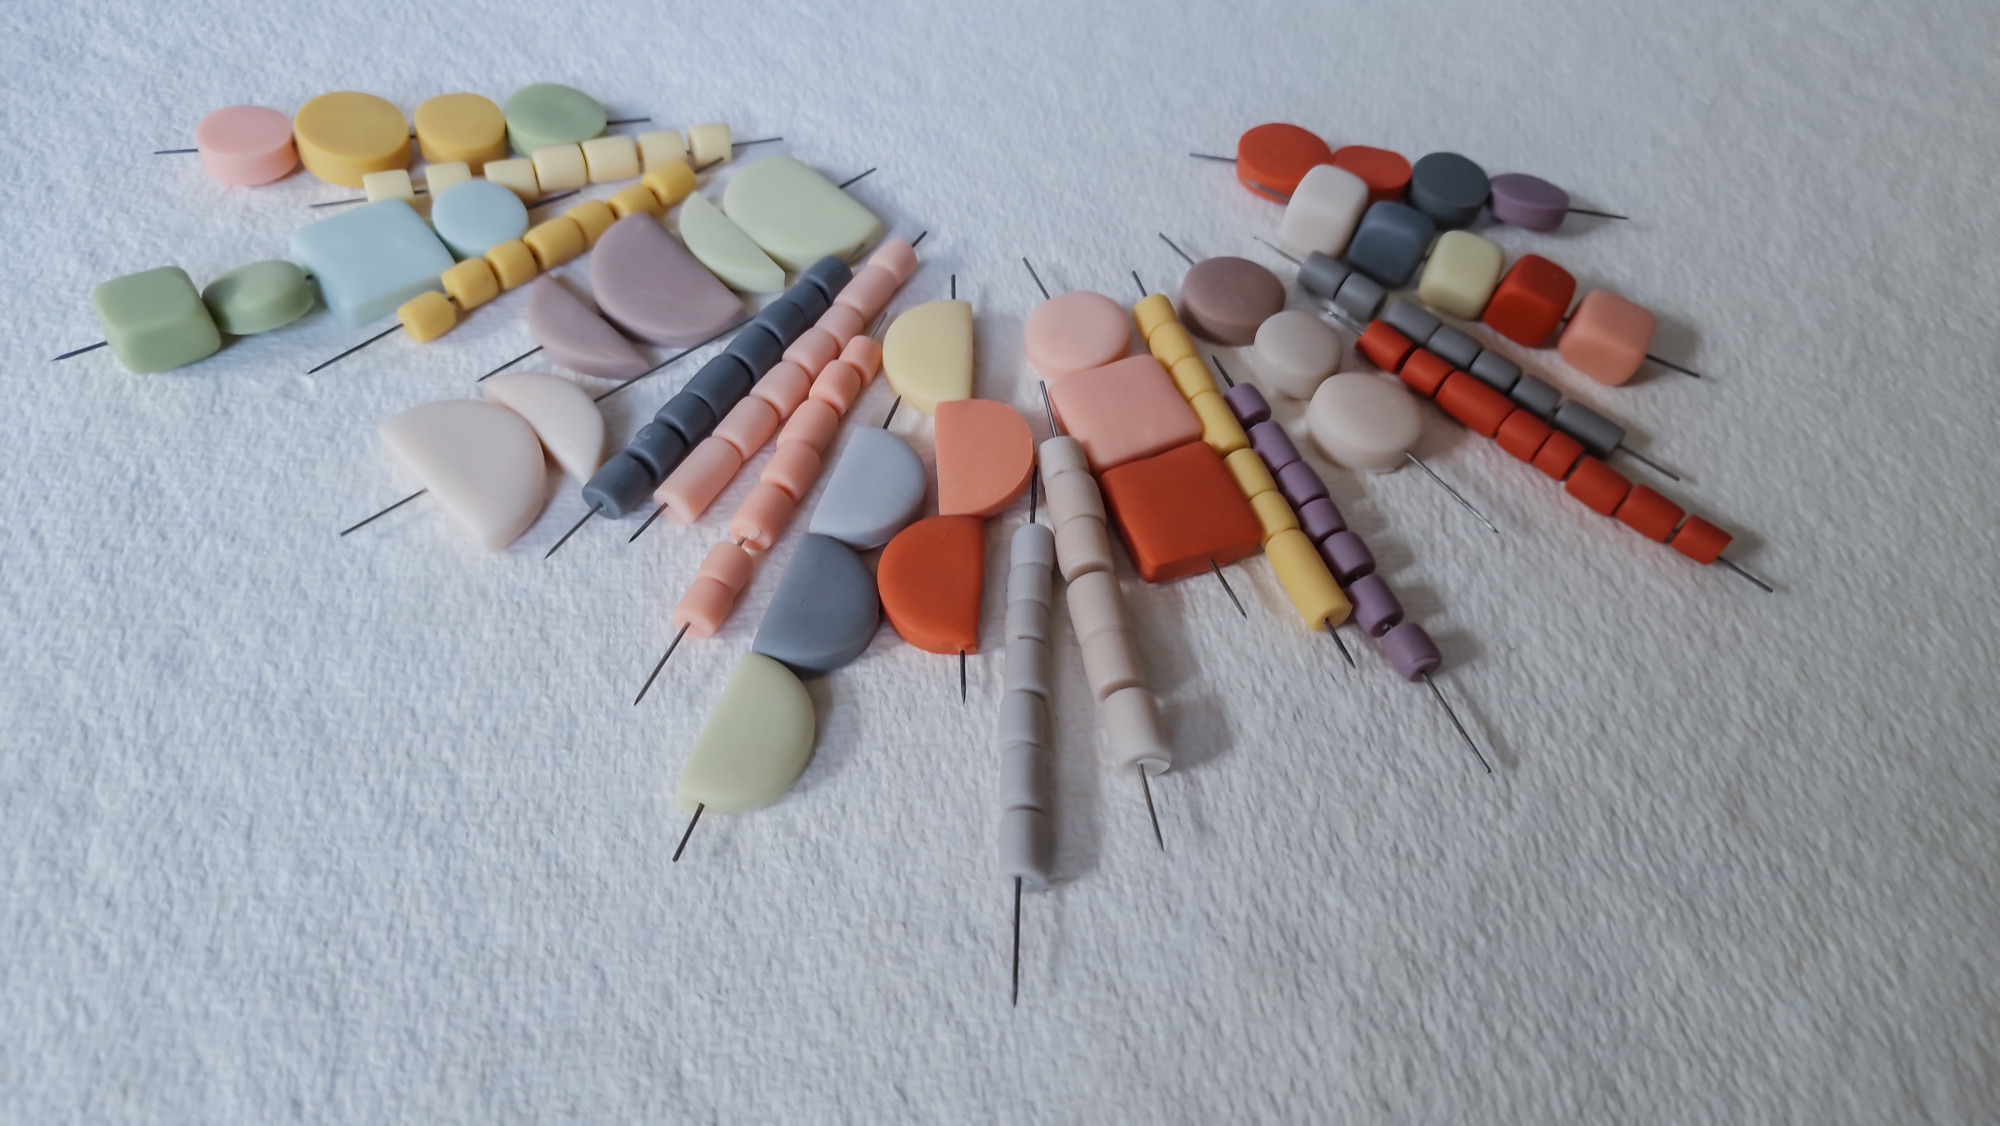 A selection of polymer clay beads made with artists powdered pigments by Clare Lloyd